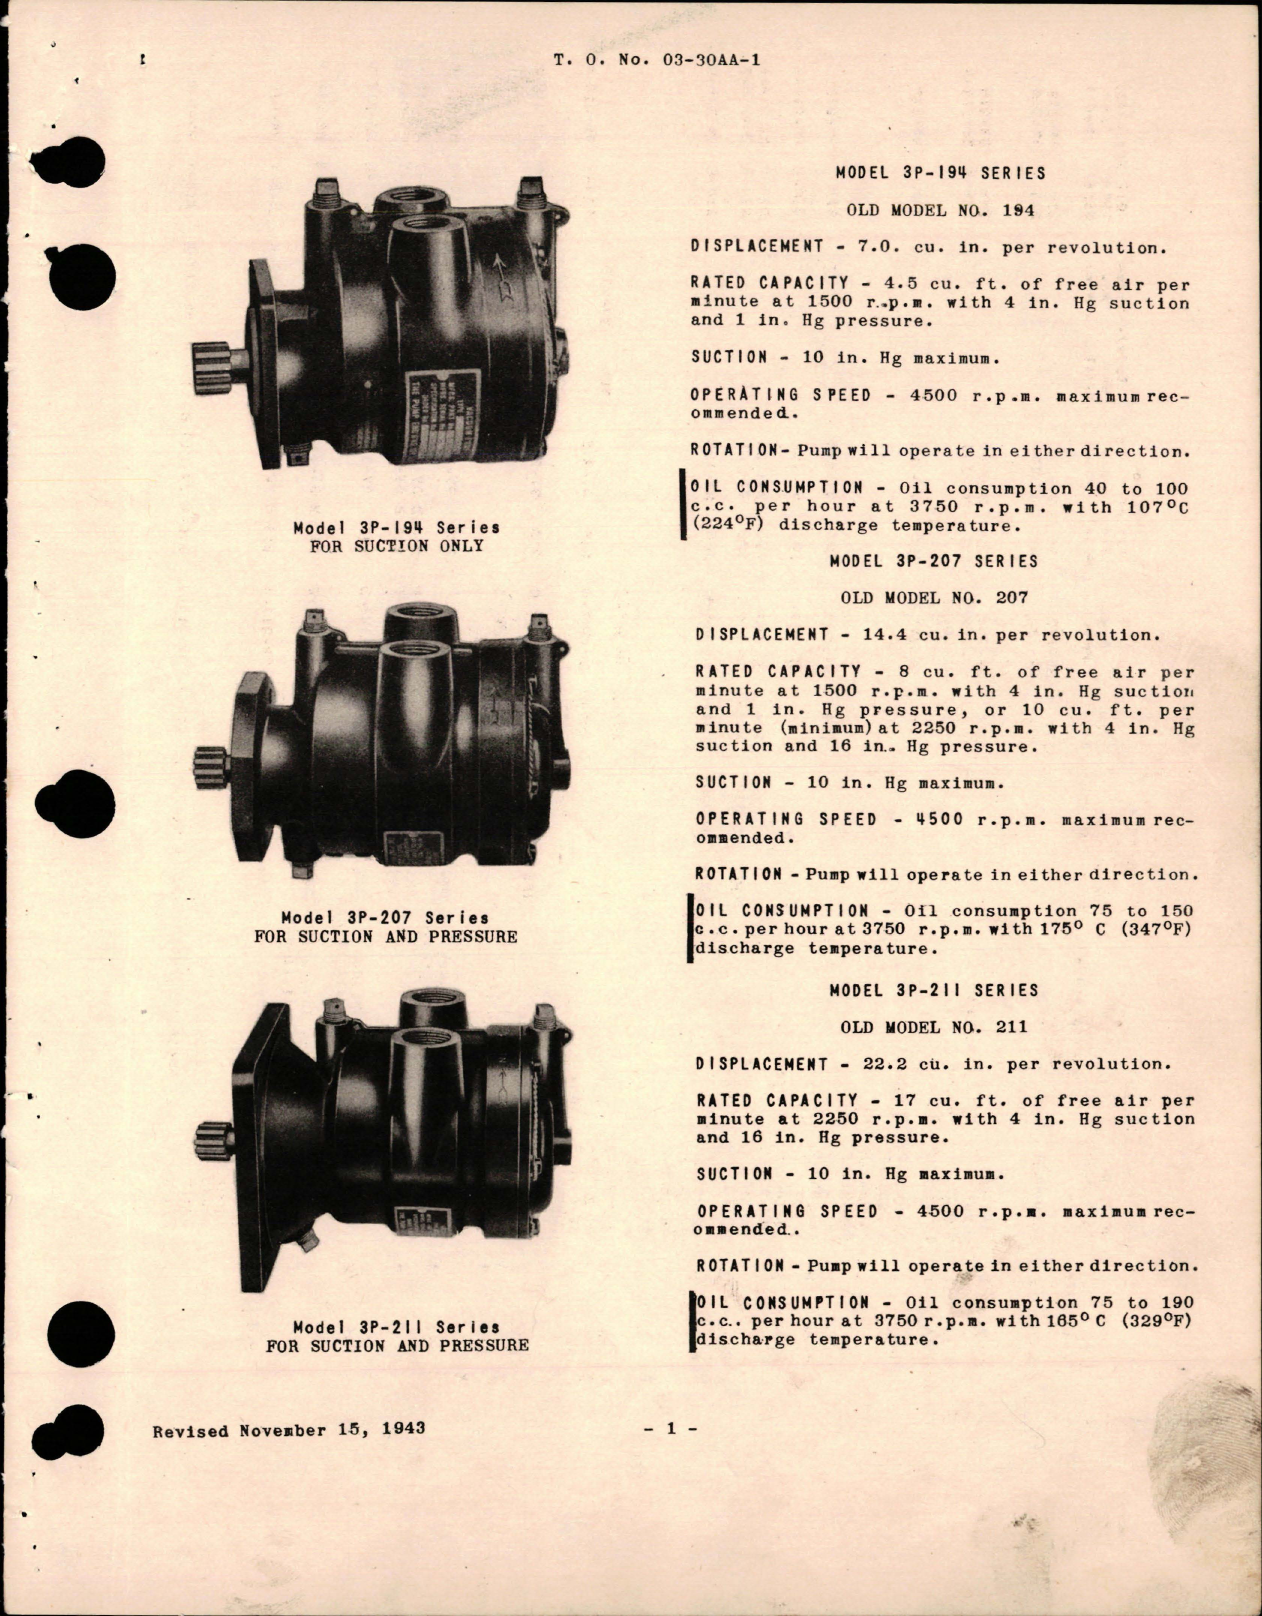 Sample page 5 from AirCorps Library document: Operation, Service and Overhaul Instructions with Parts for Engine Driven Vacuum Pumps